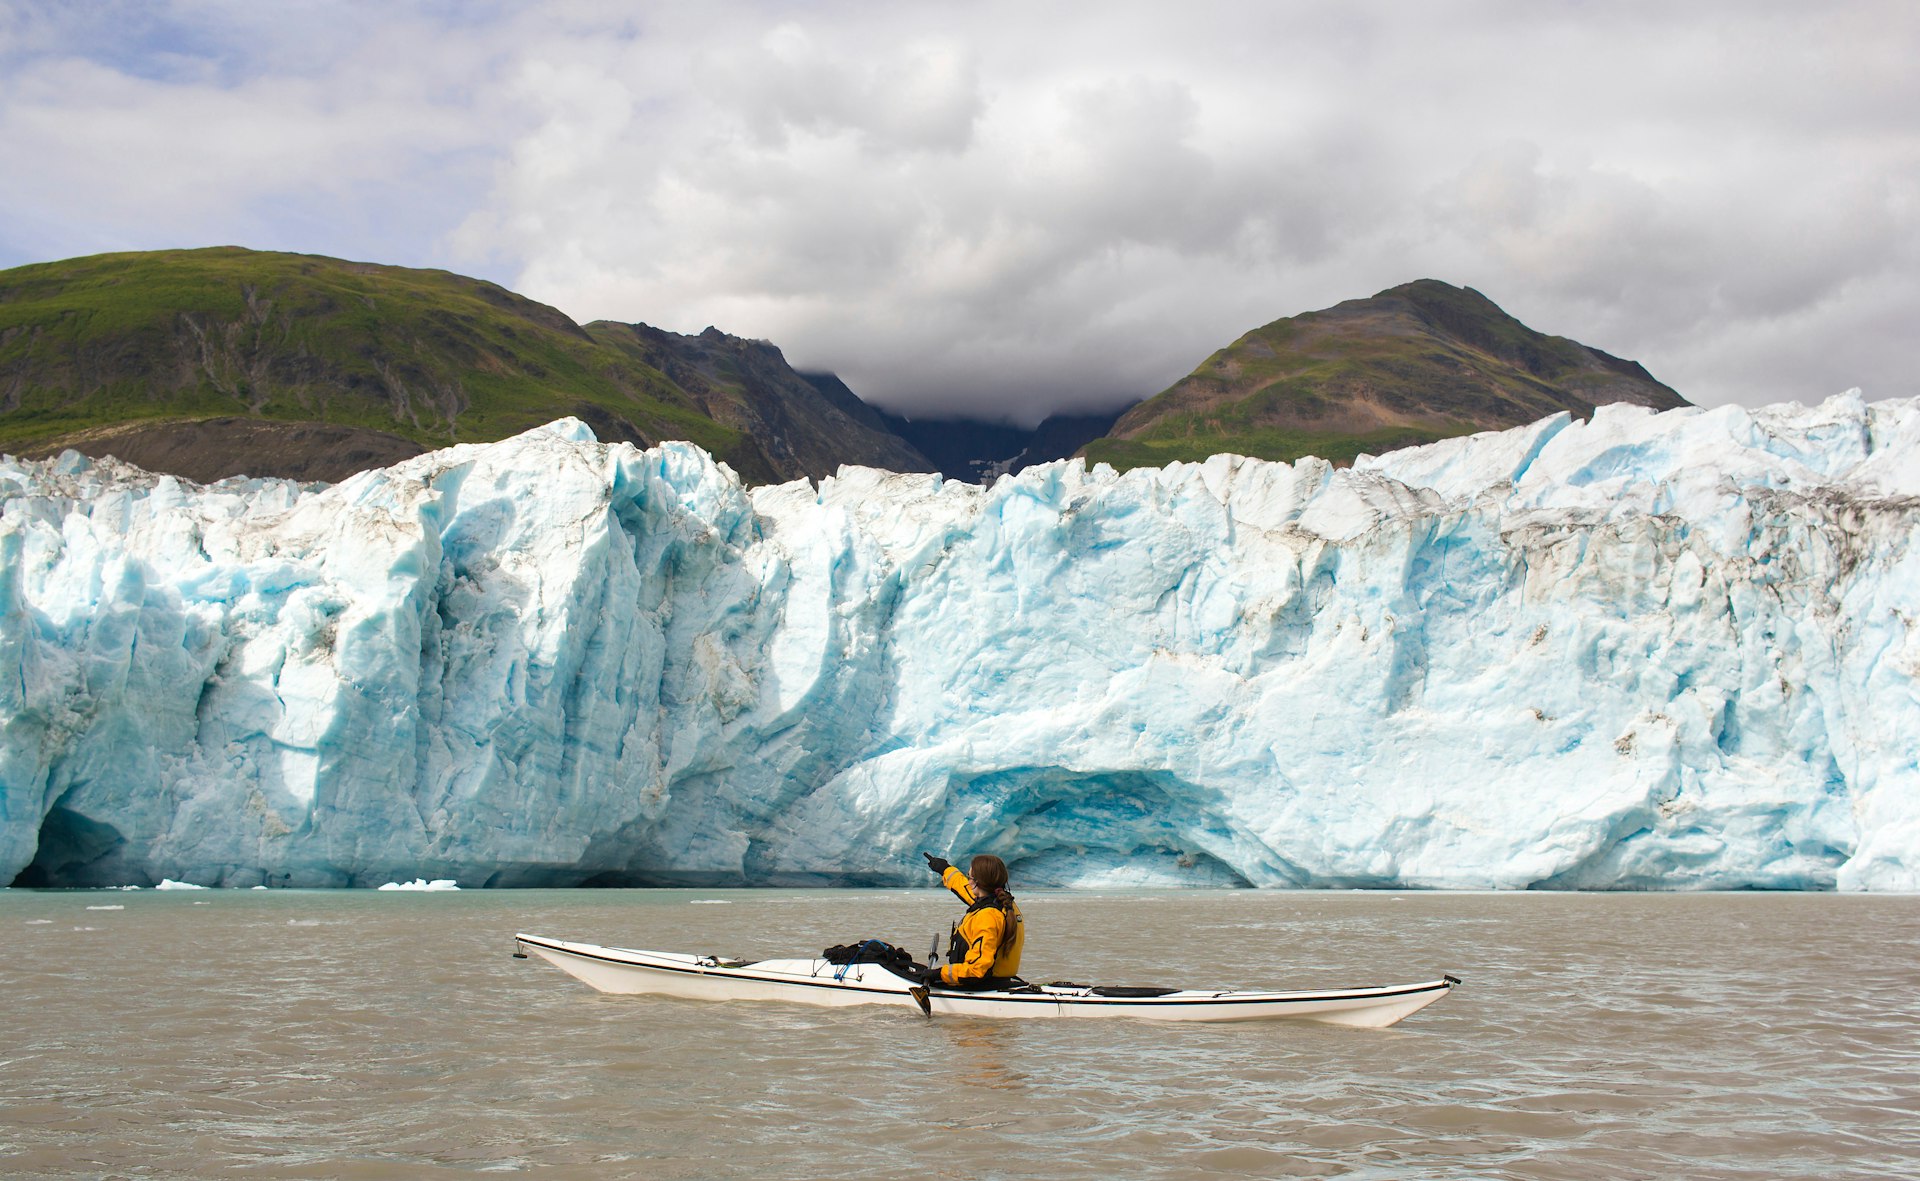 A person wearing a yellow jacket in a white kayak points at a vast wall of ice with green hills behind